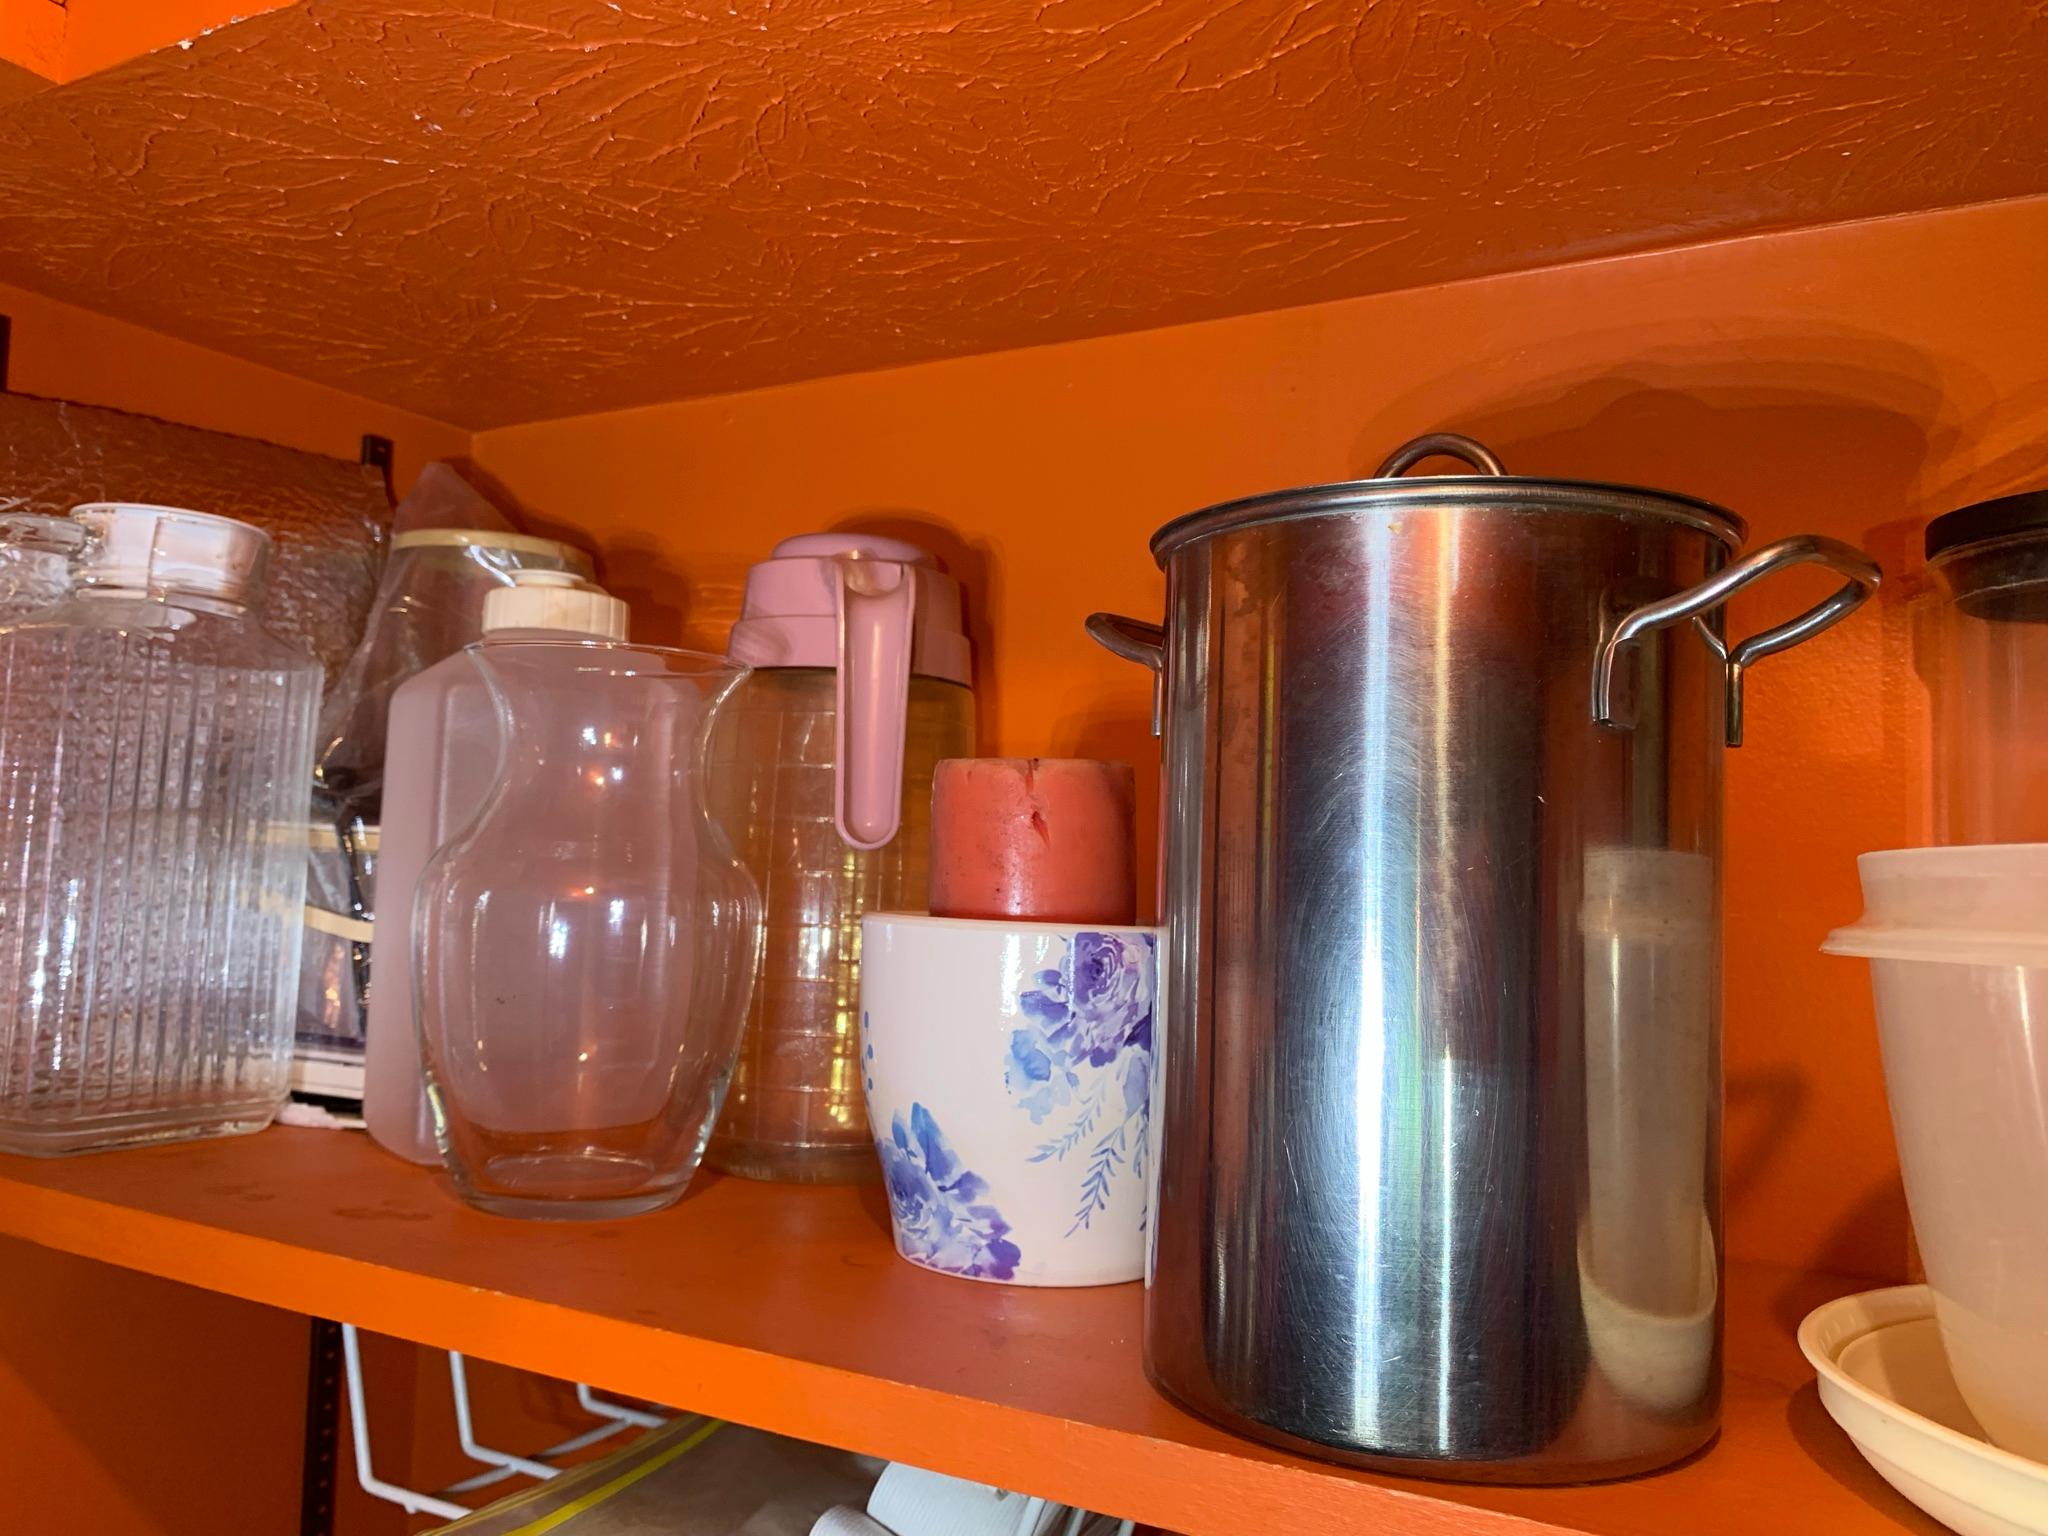 Pantry Cleanout - Pots, Pans, Casserole Dishes, Measuring Cups, Brooms & More. See Photos.